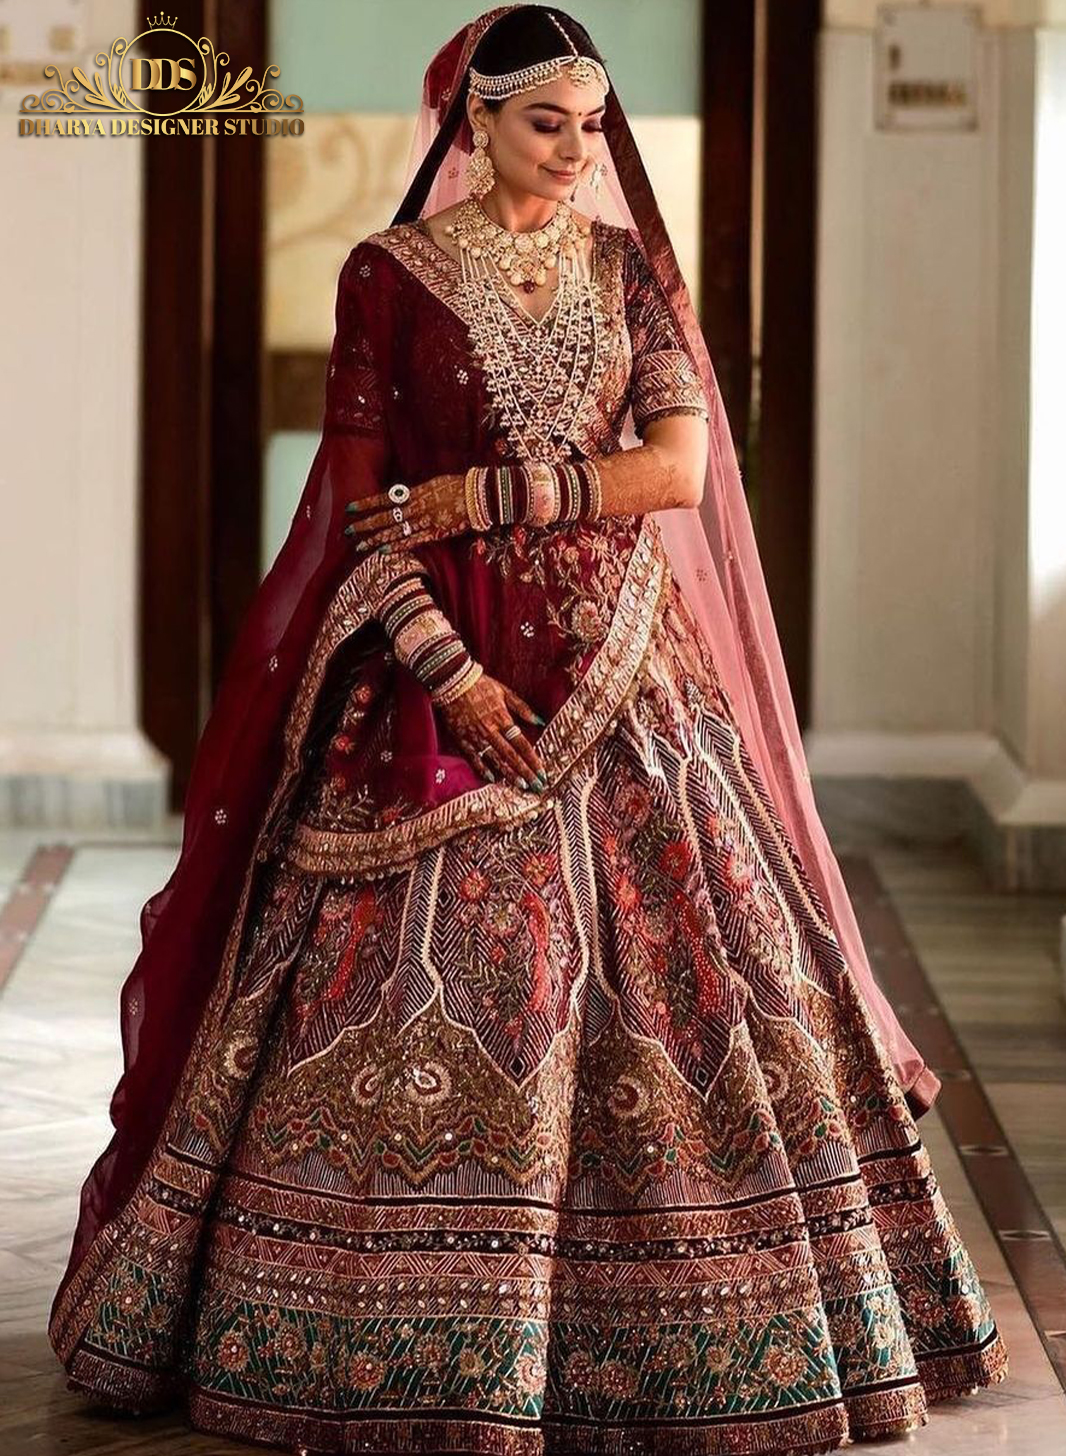 21 Lehenga Trends All 2021/ 2022 Brides Should Know Of! | Indian wedding  outfits, Indian bride outfits, Indian bridal dress